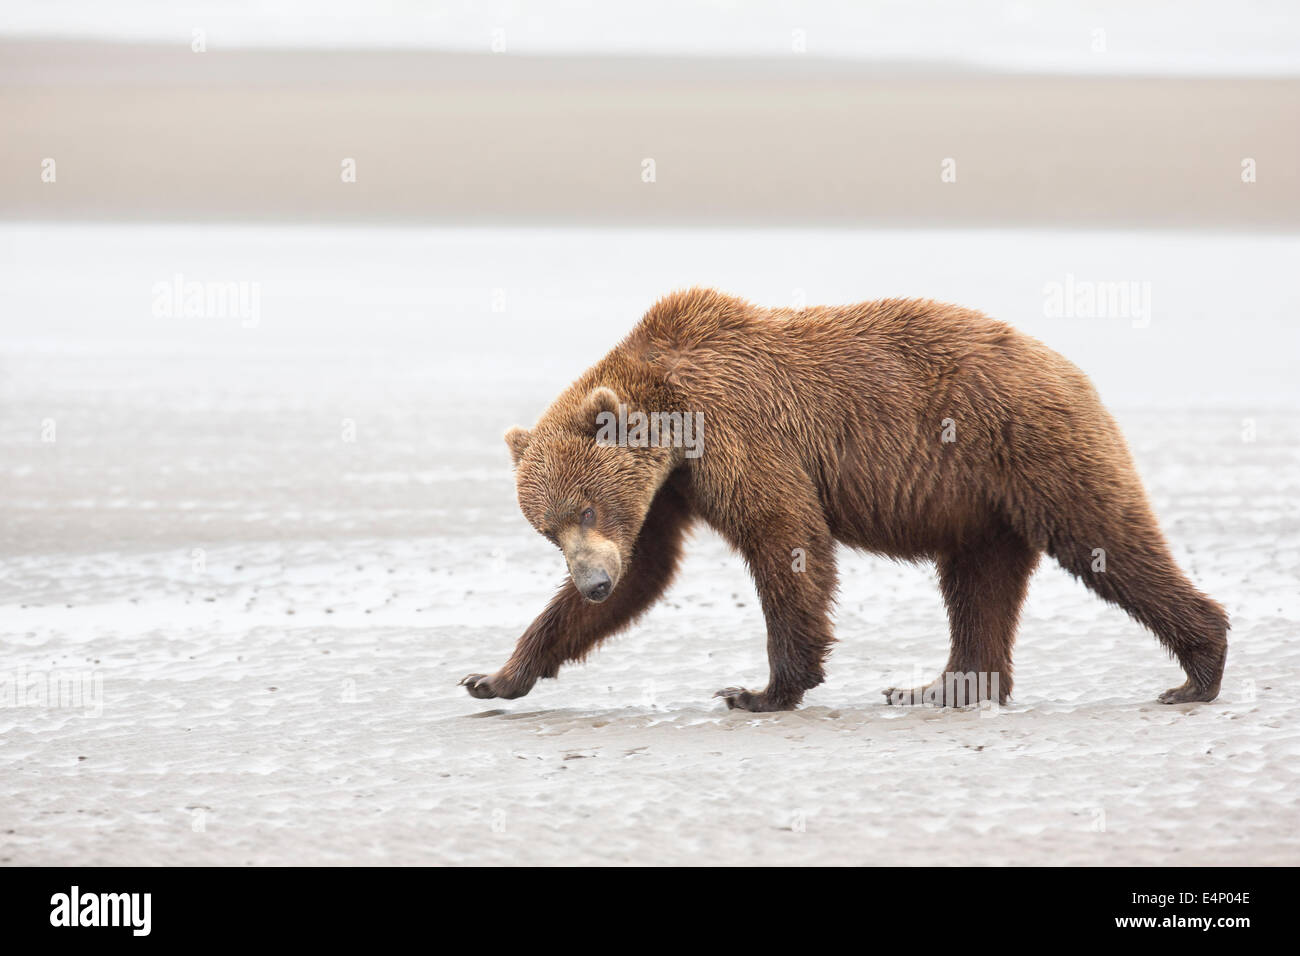 Grizzly Bear crossing mud-flats in Alaska Stock Photo